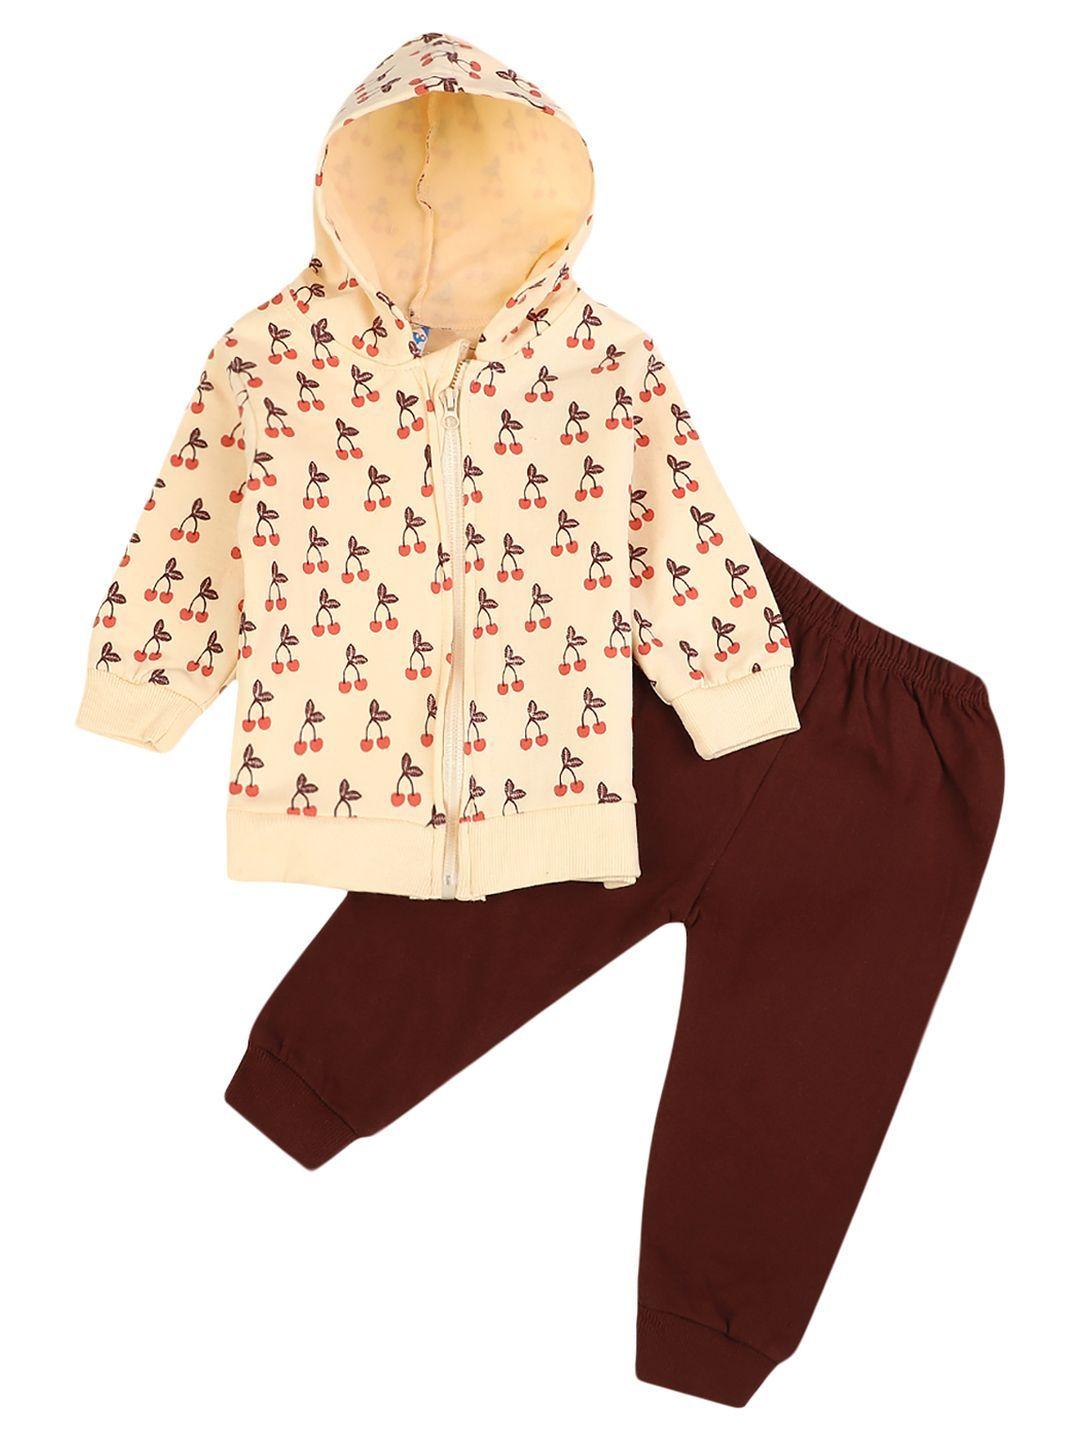 v-mart-unisex-kids-cream-coloured-&-brown-printed-t-shirt-with-trousers